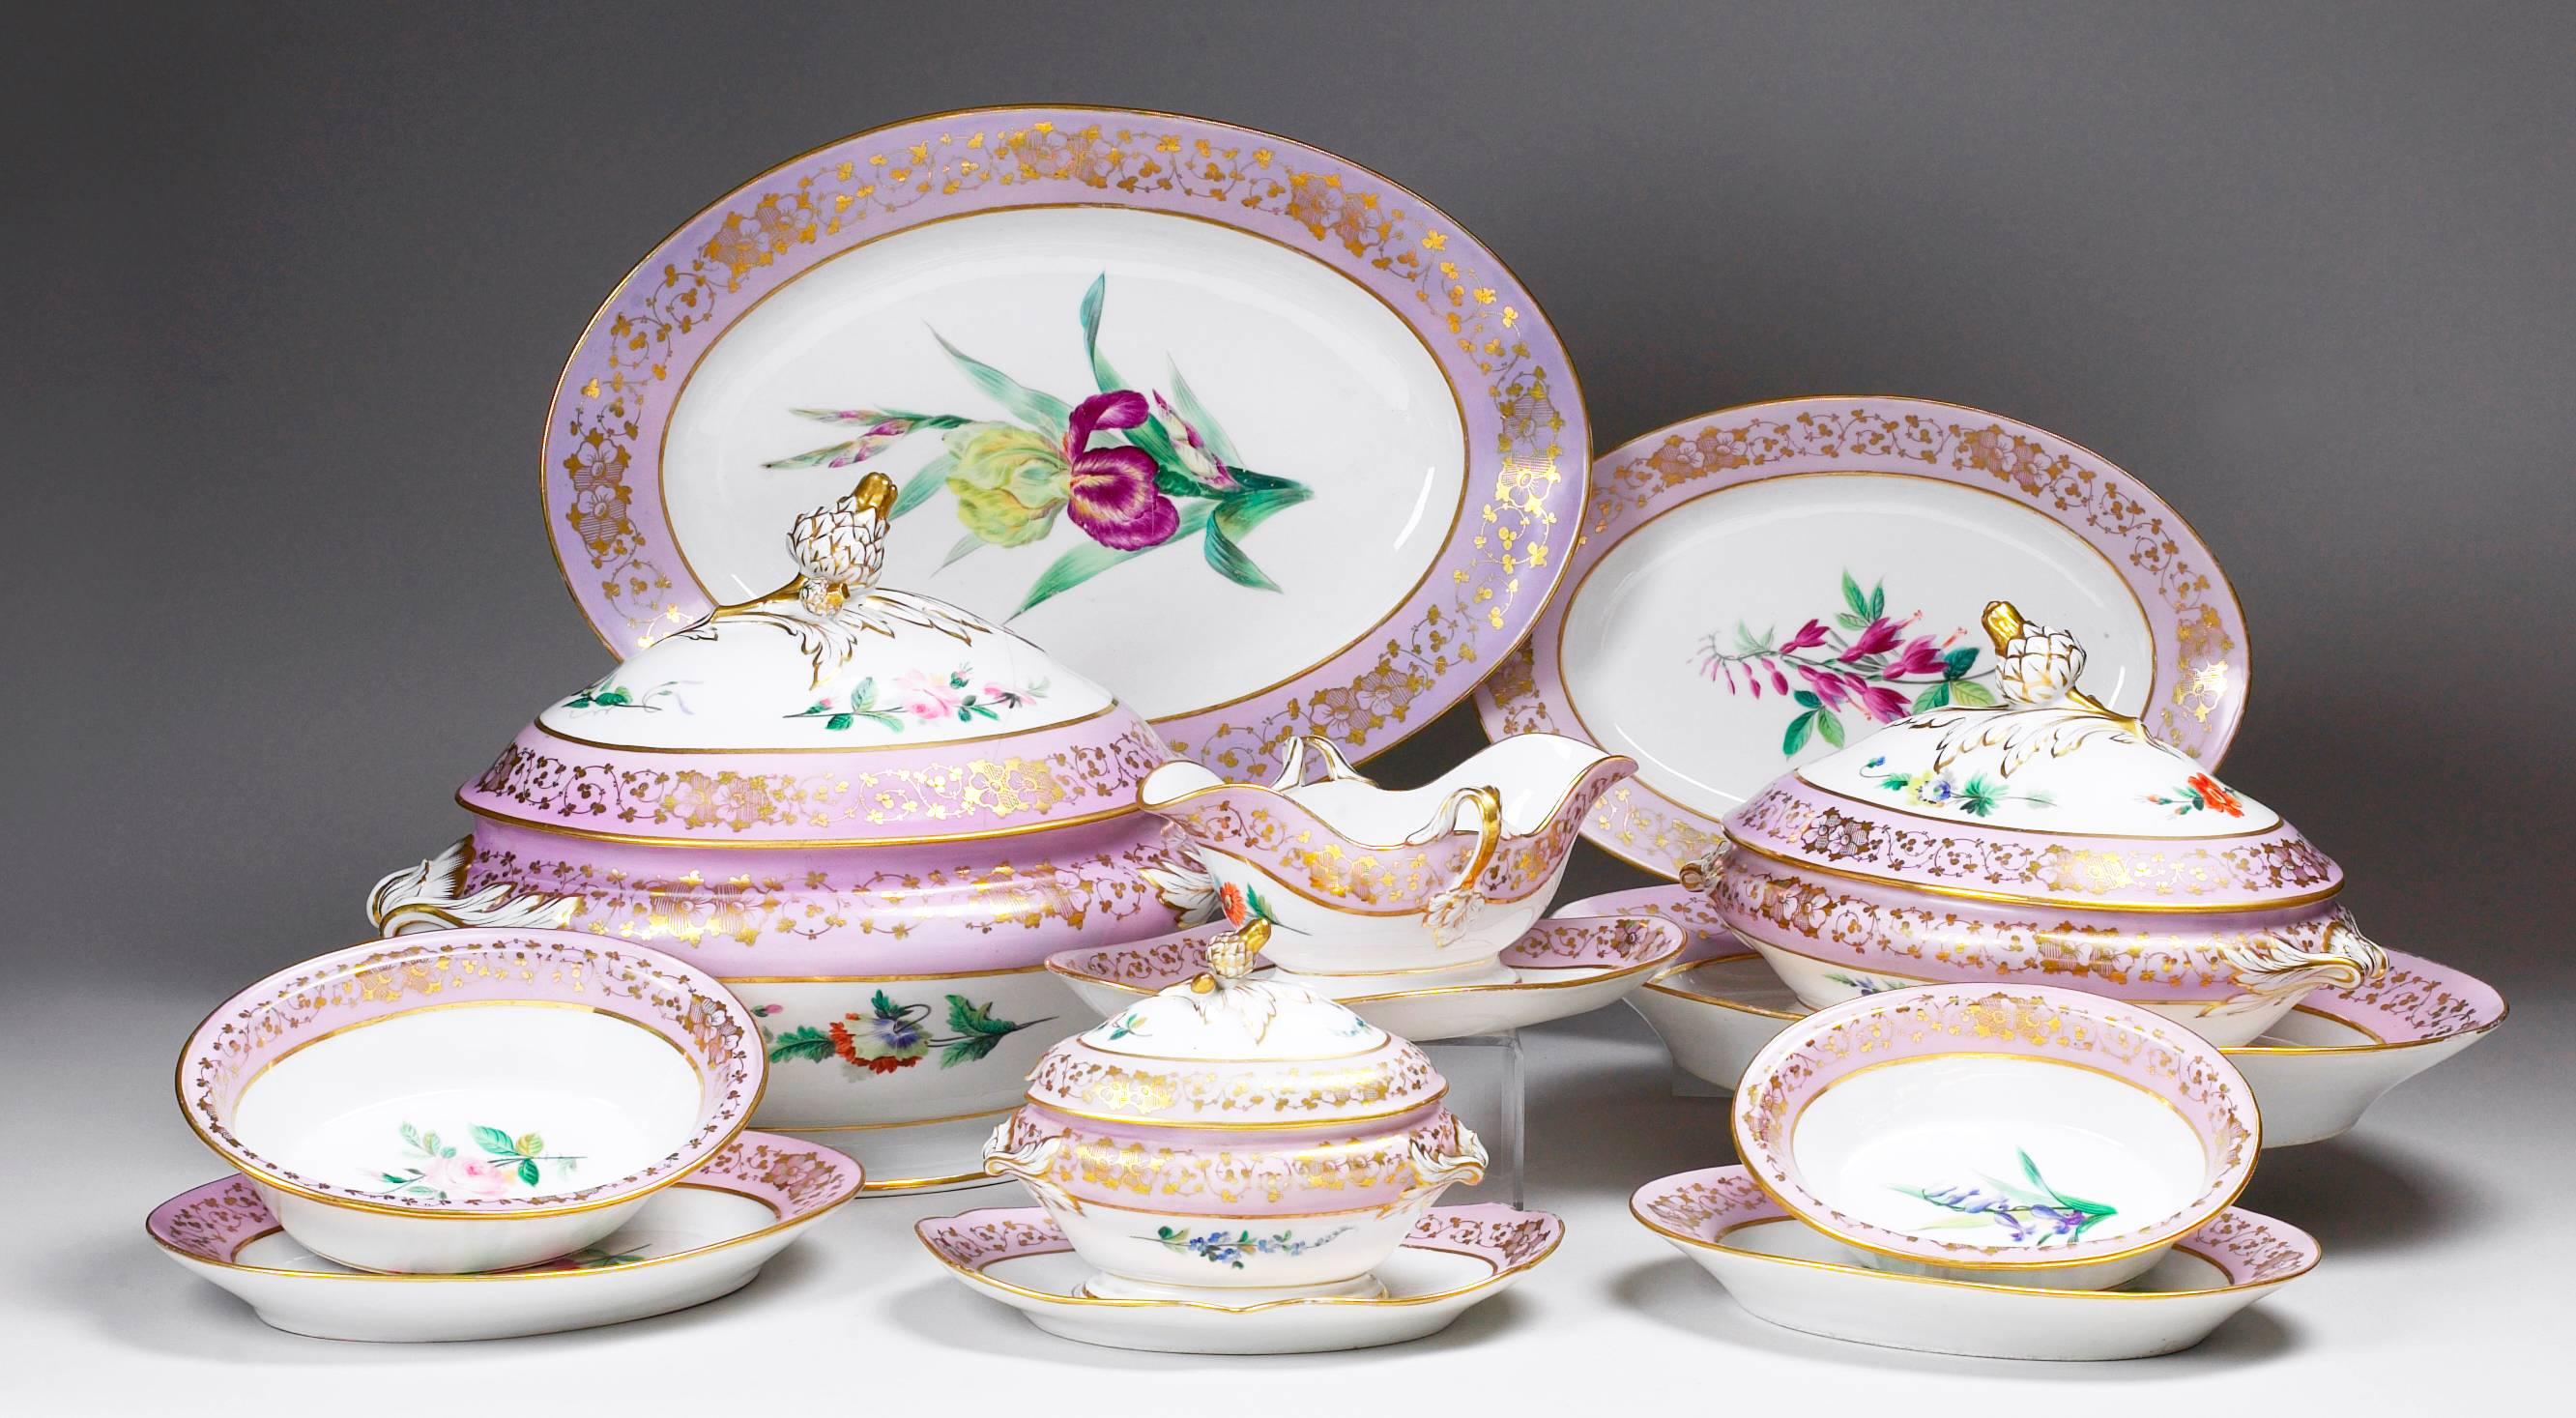 French Haviland Limoges dinner and dessert service,
the rims painted with delicate scrolling gilding to the borders, enclosing,
paintings of fruit or floral specimens, the covers molded with acorns,
picked out in gilding, unmarked, circa